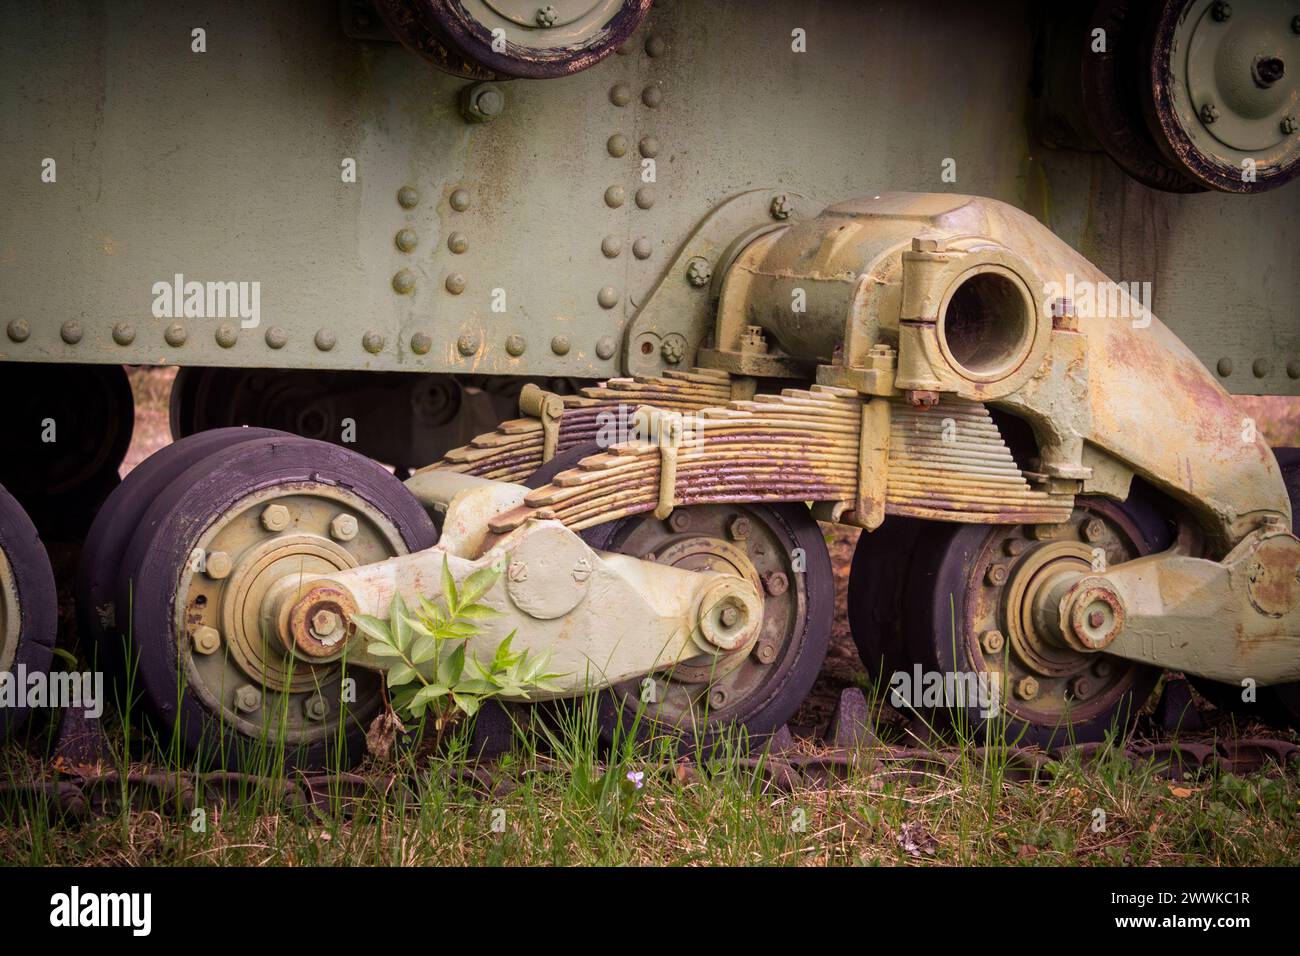 Closeup of wheels, suspension and caterpillar track of an old tank Stock Photo